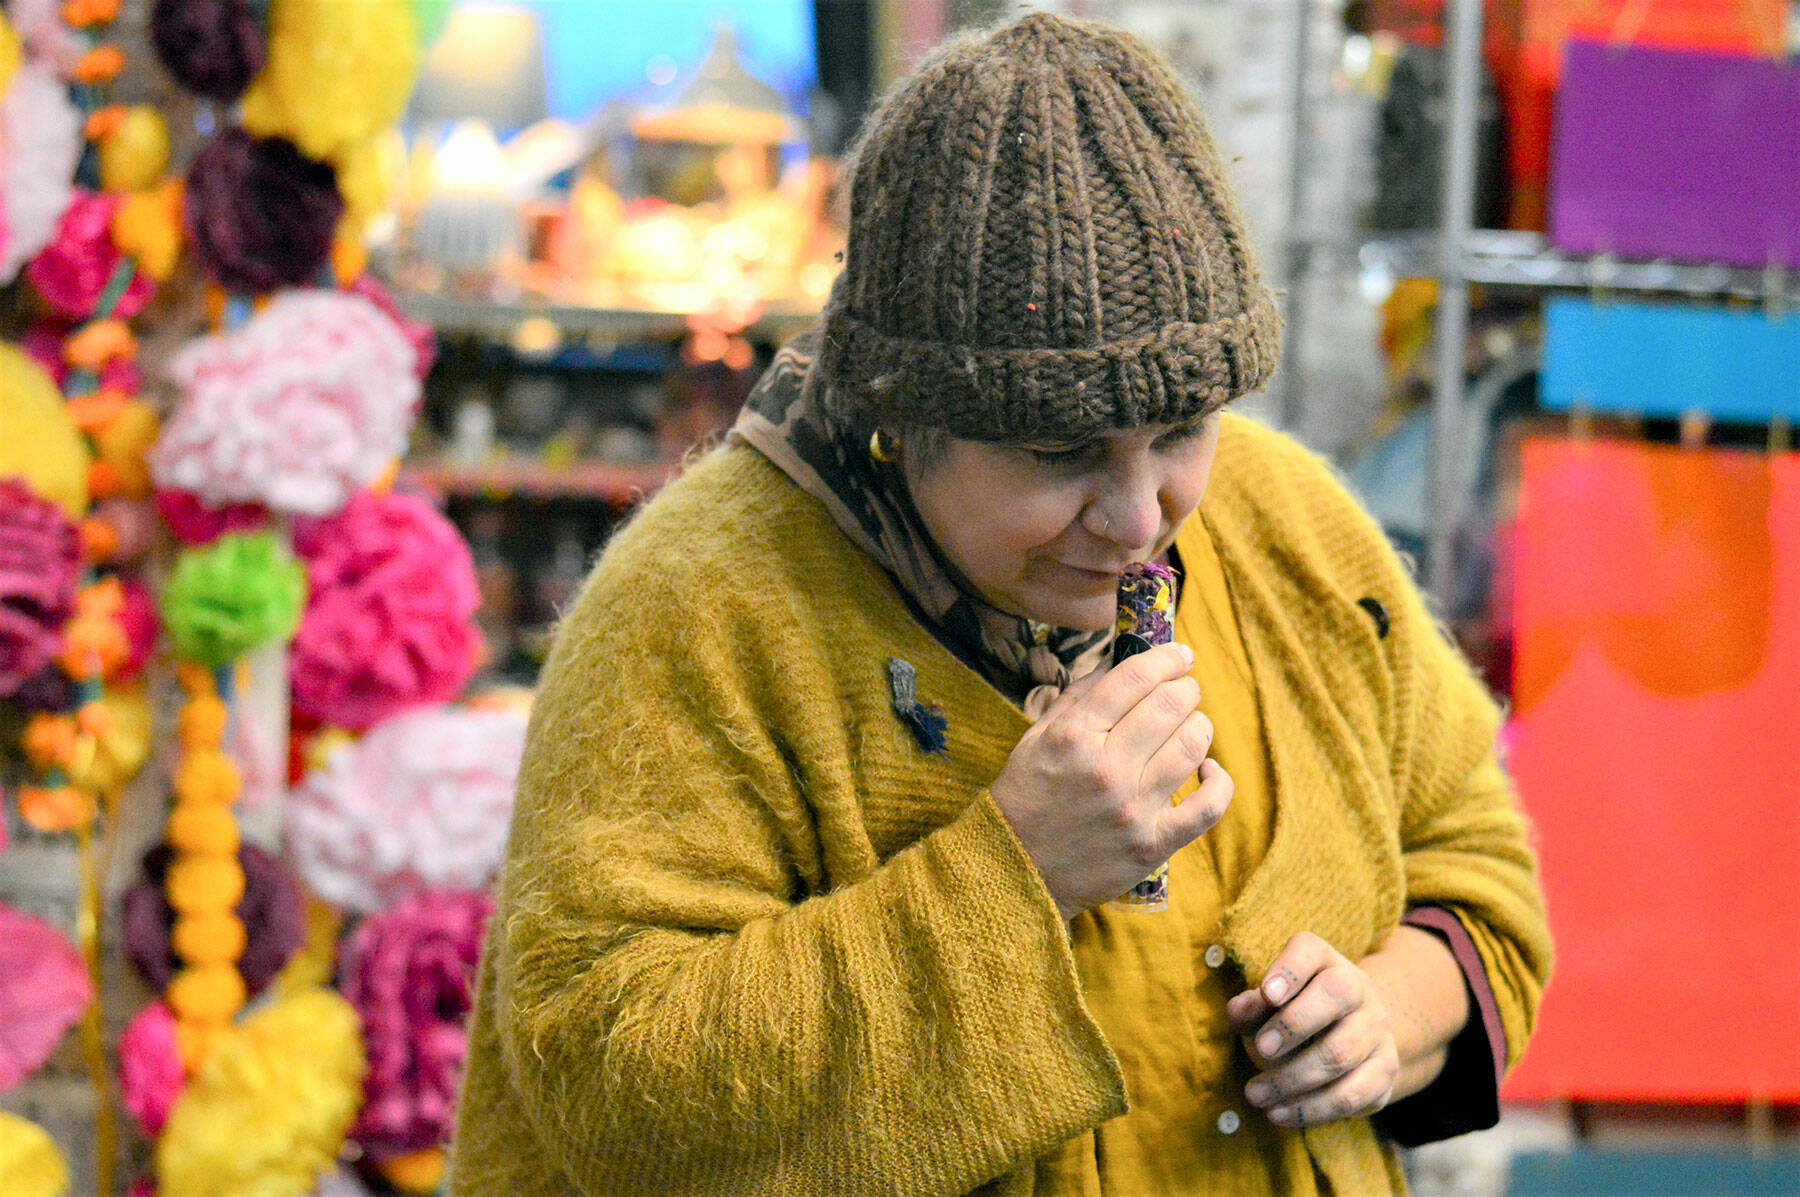 Artist Lisa Leporati checks the fragrance of her flower confetti, one of the items she’ll offer during the Handwork Market, an artists’ showcase at the Cotton Building in downtown Port Townsend on Saturday. (Diane Urbani de la Paz/Peninsula Daily News)